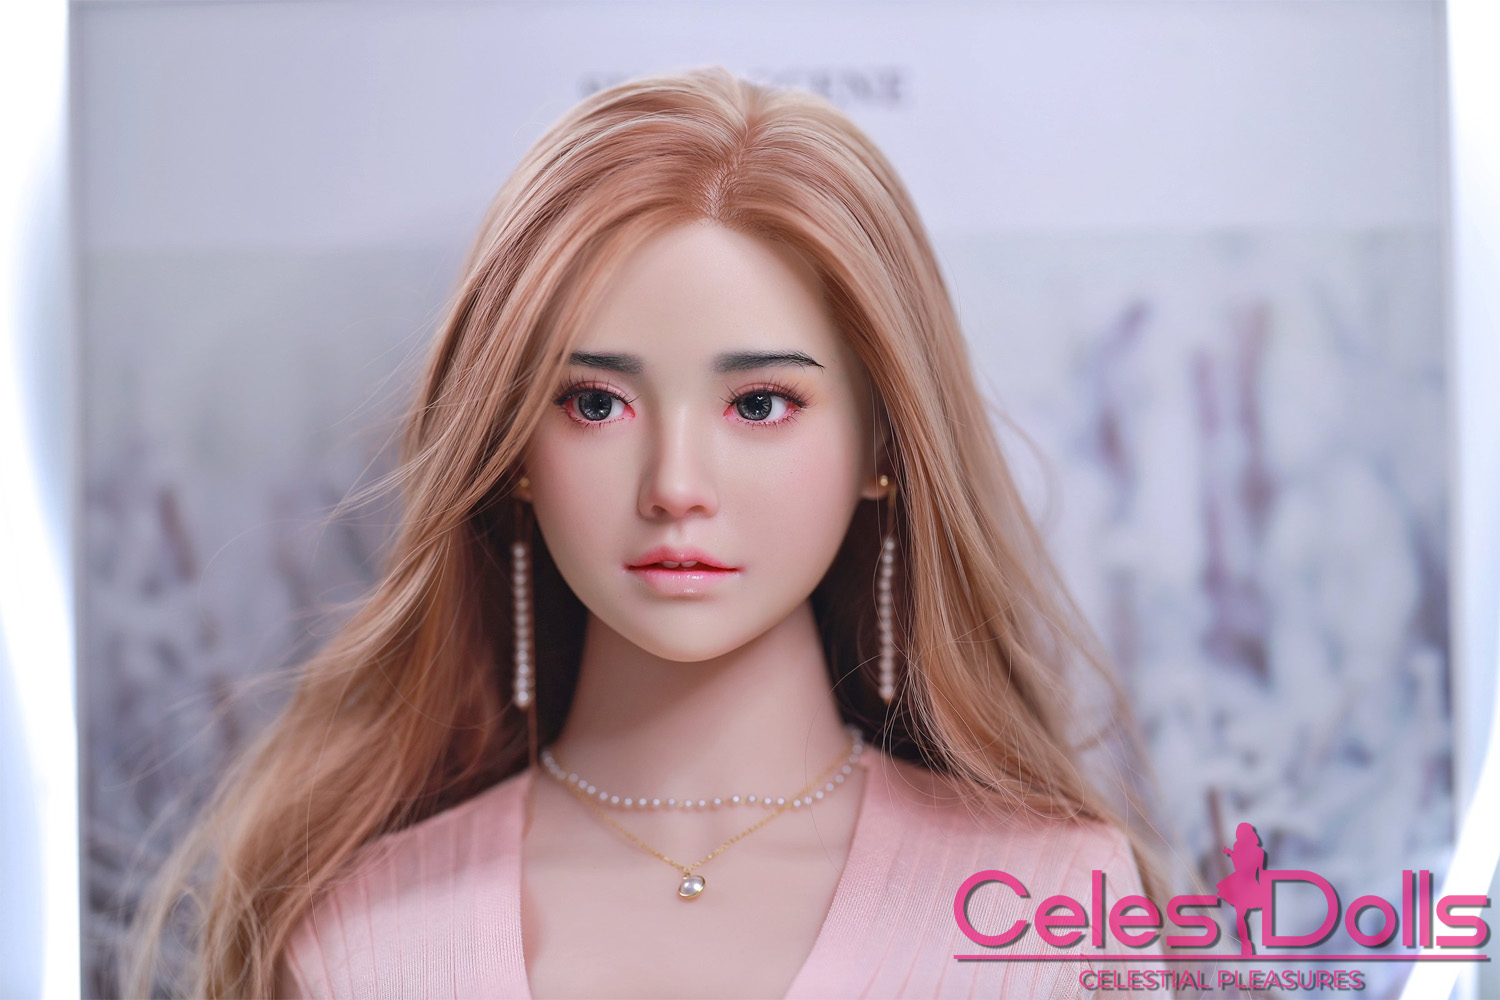 Jy Doll Temporarily Stops Offering Their Weight Reduction Option